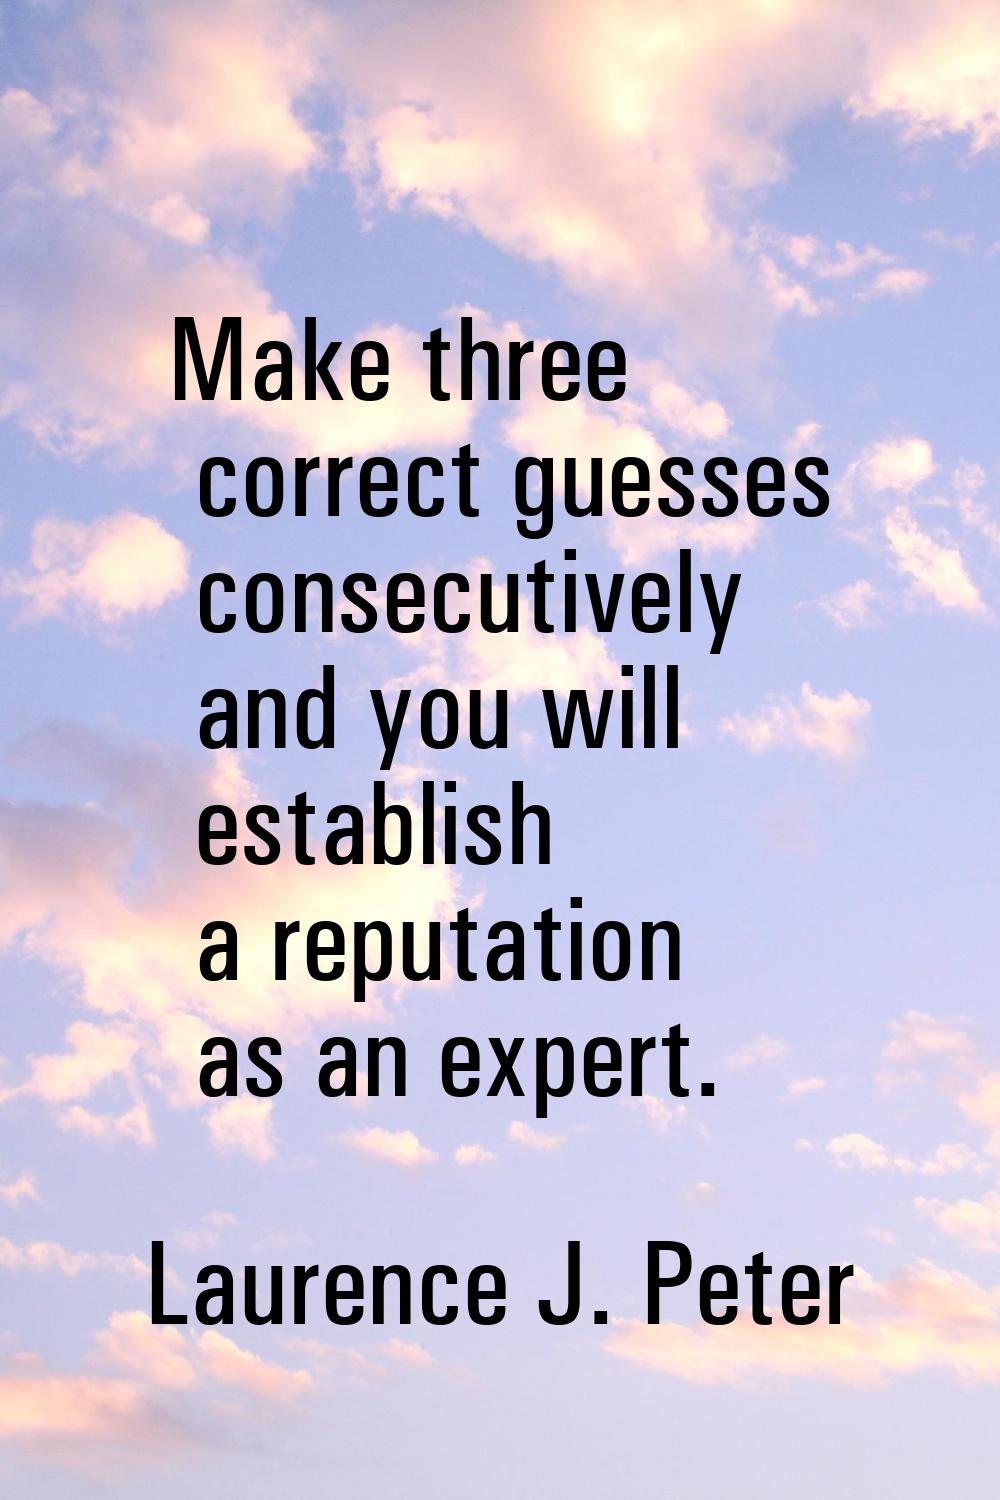 Make three correct guesses consecutively and you will establish a reputation as an expert.